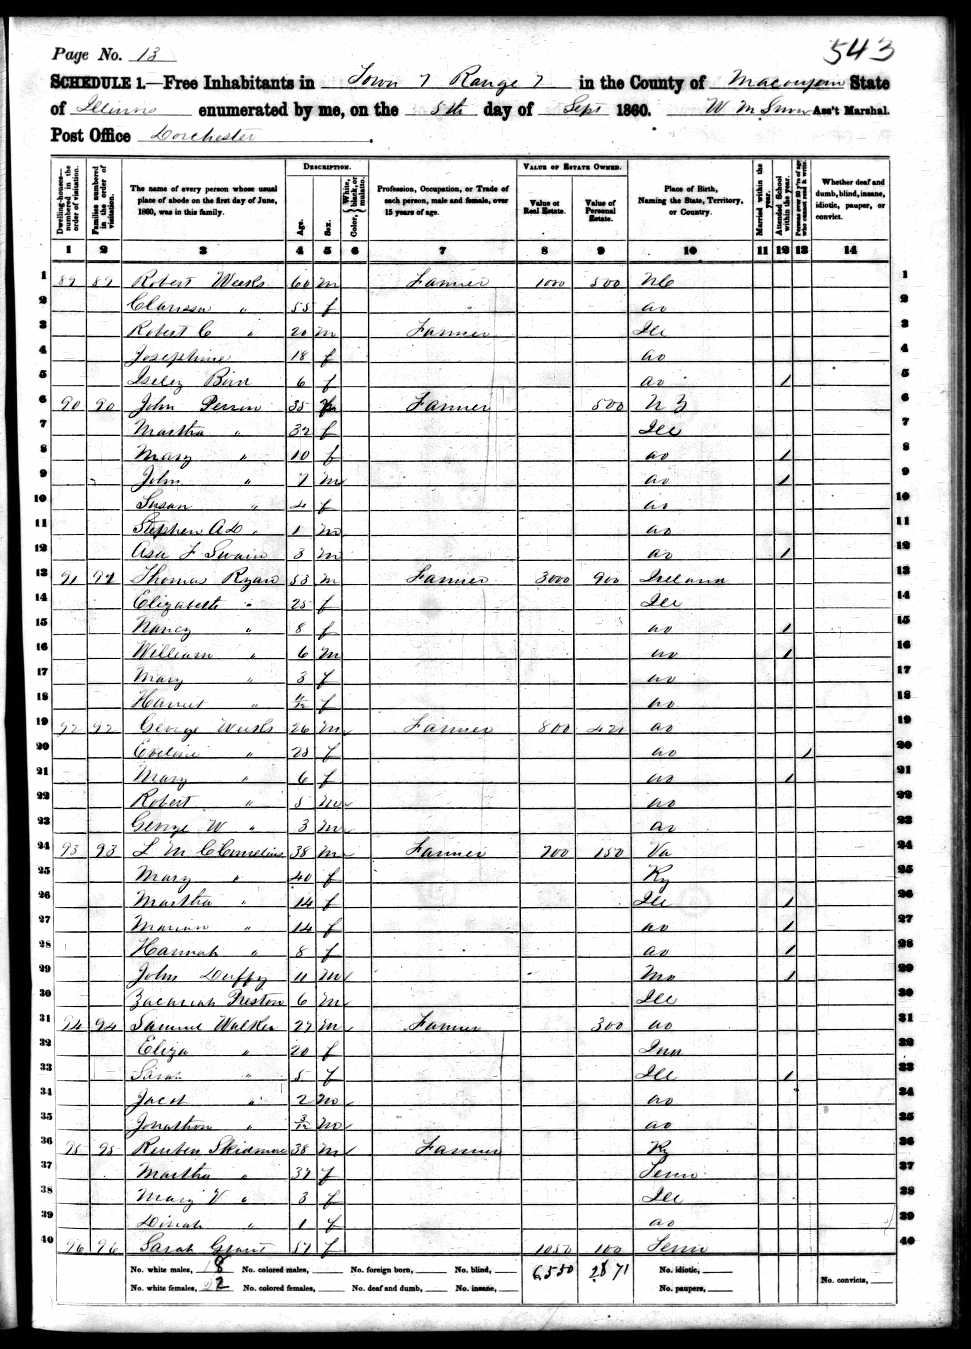 Samuel Walker (possible son of Jacob and Agnes Walker), 1860 Macoupin County, Illinois, census